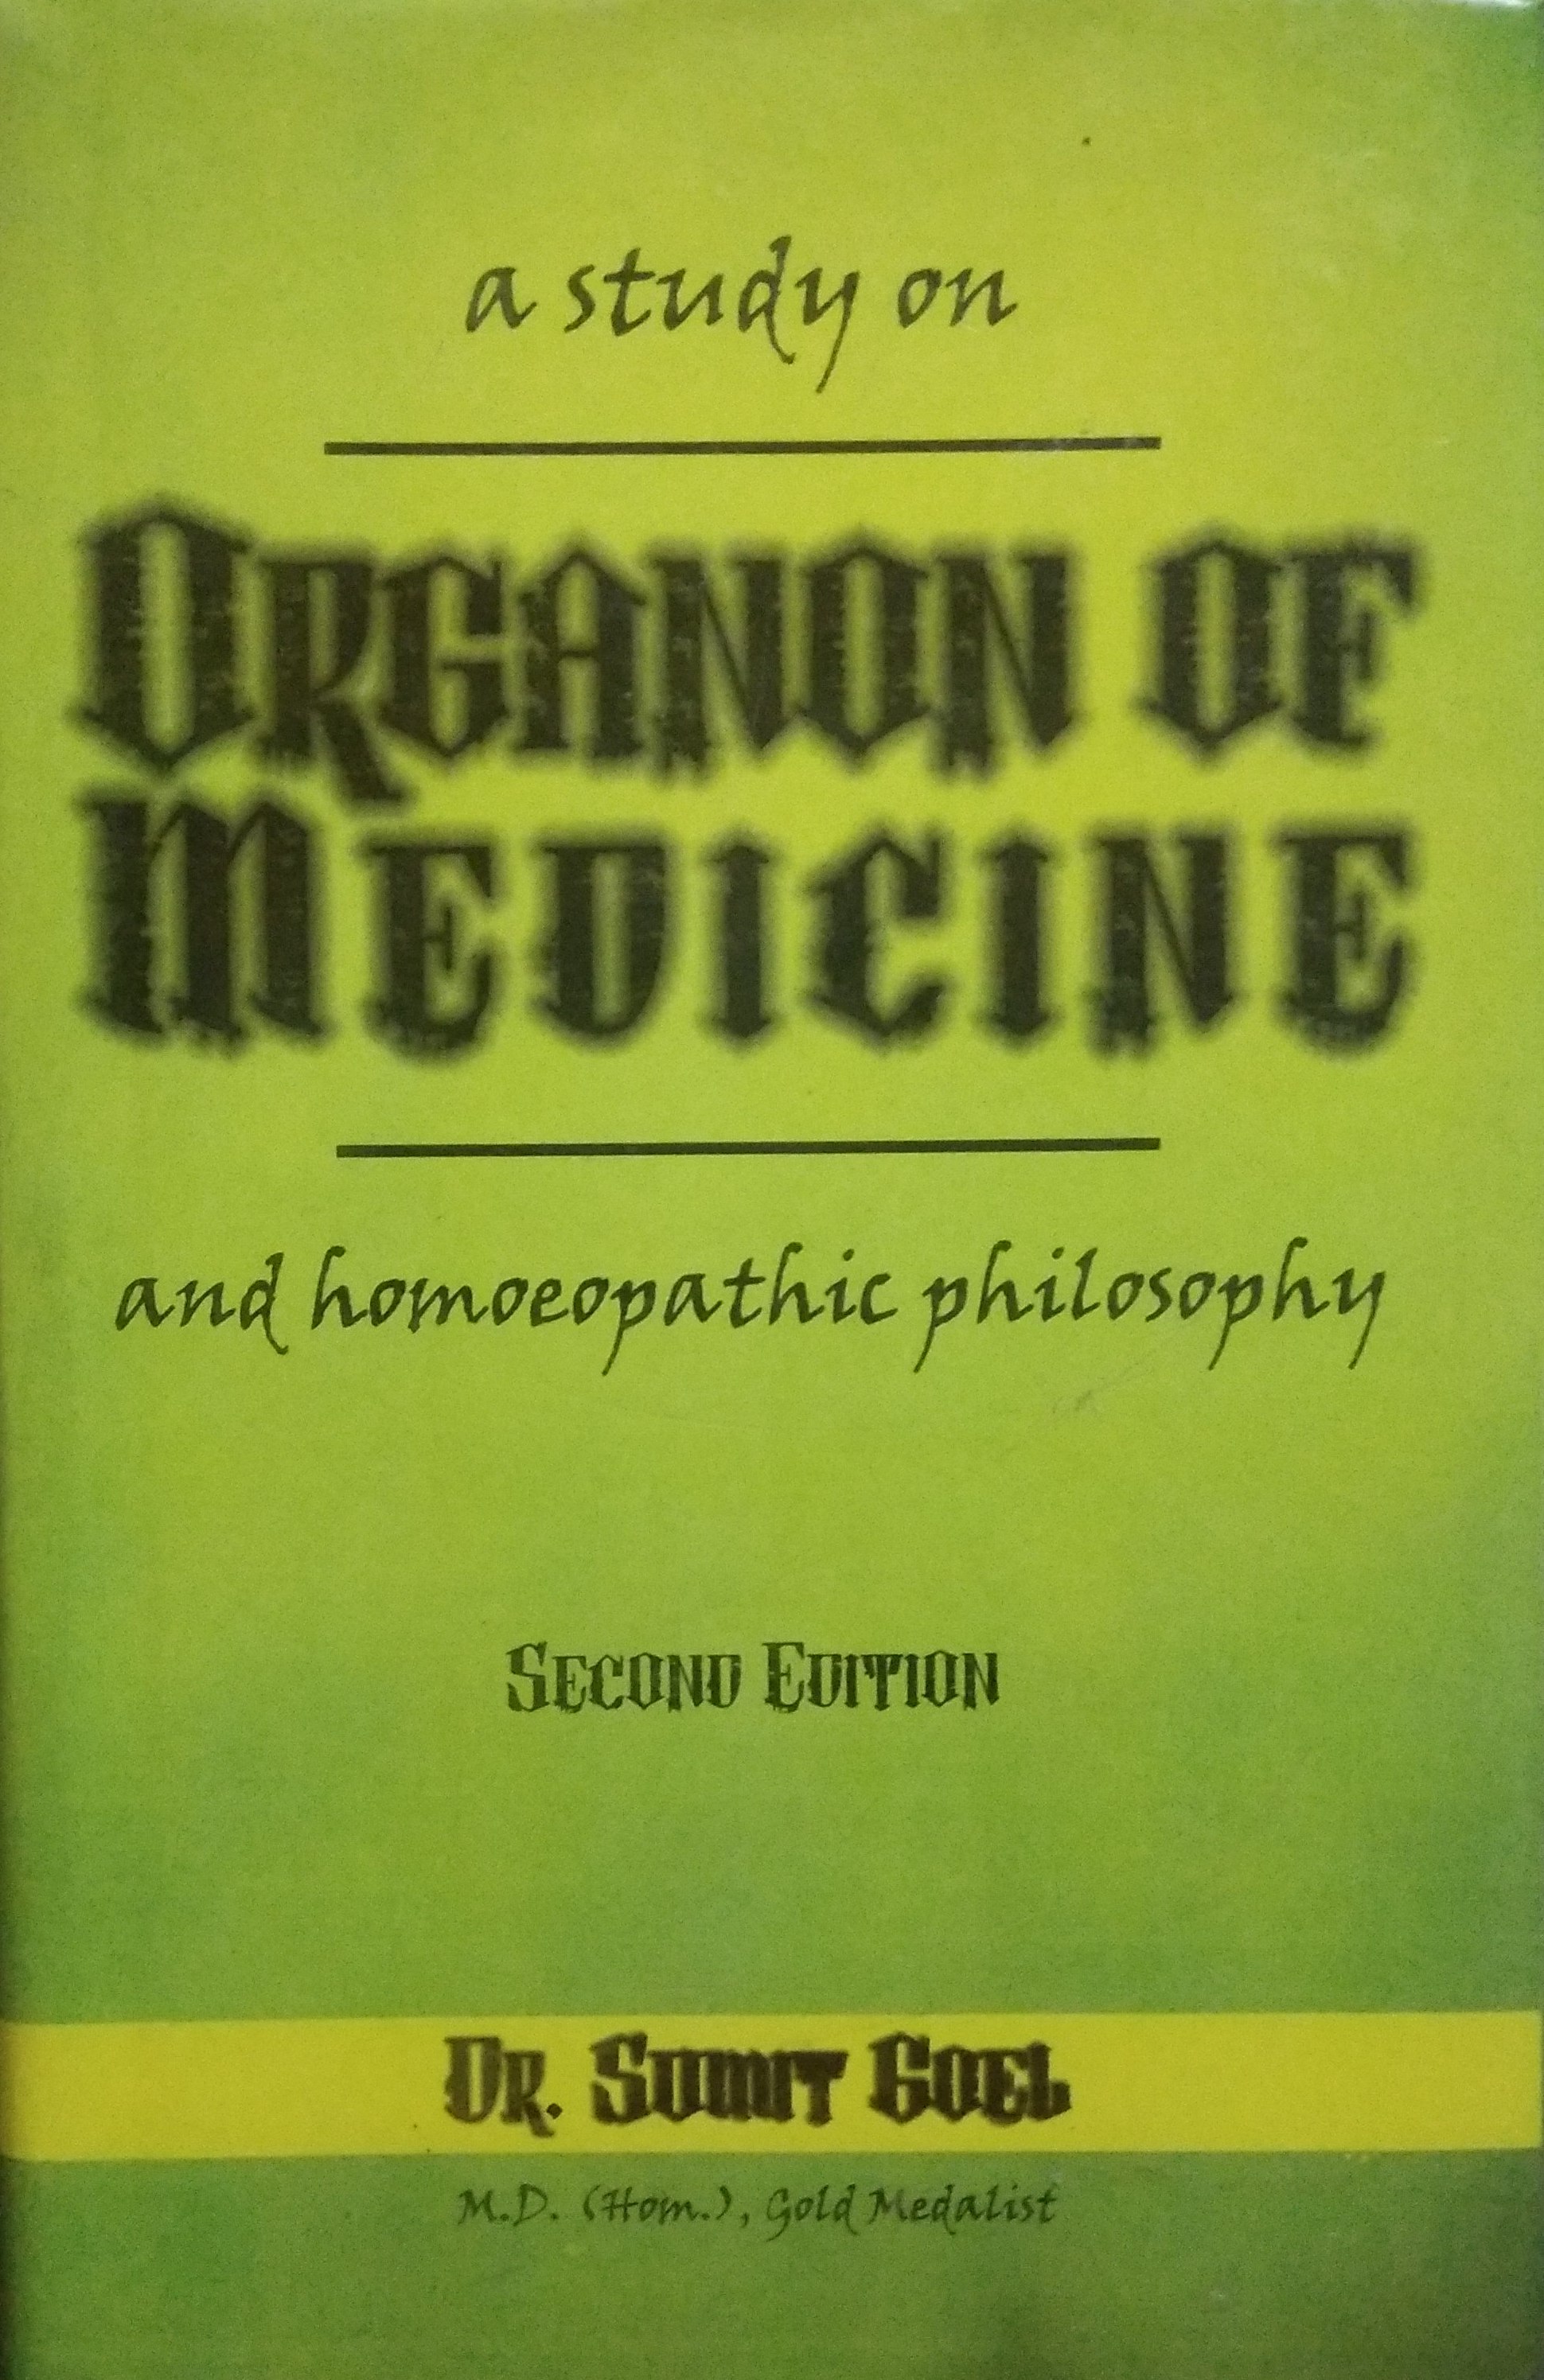 a-study-on-organon-of-medicine-and-homoeopathyic-philosophy